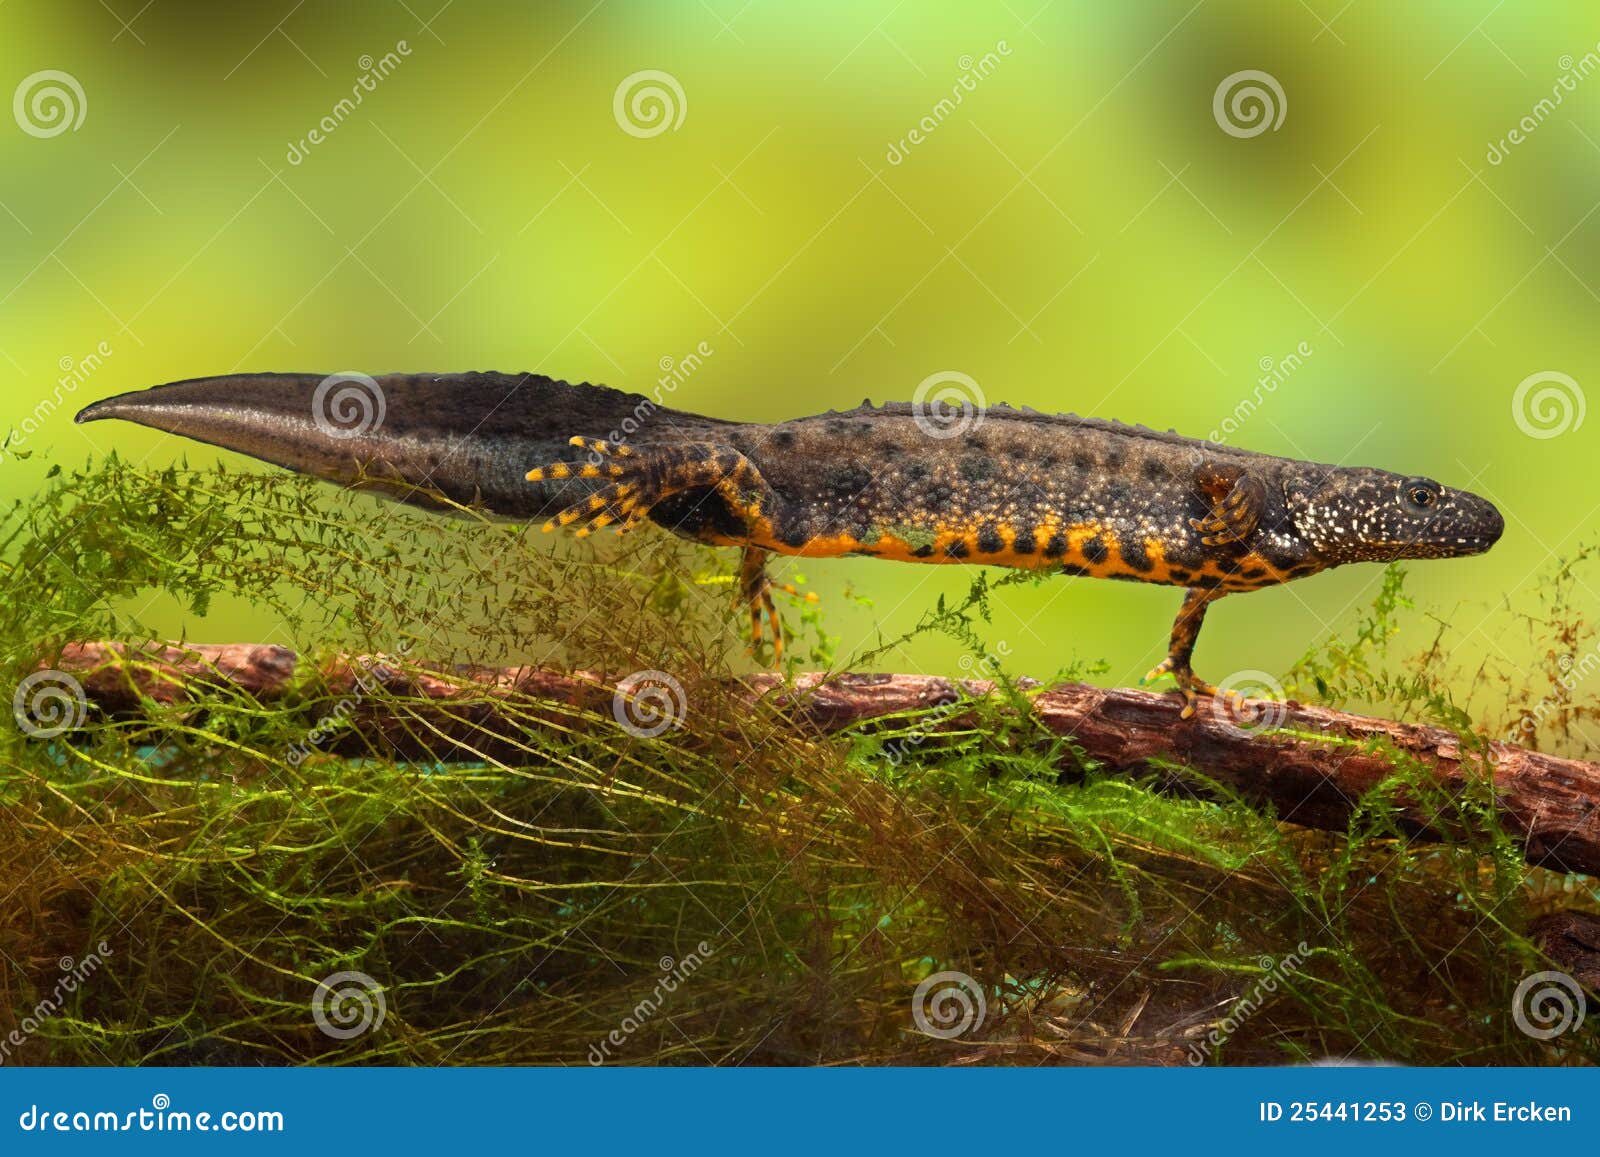 great crested newt or water dragon